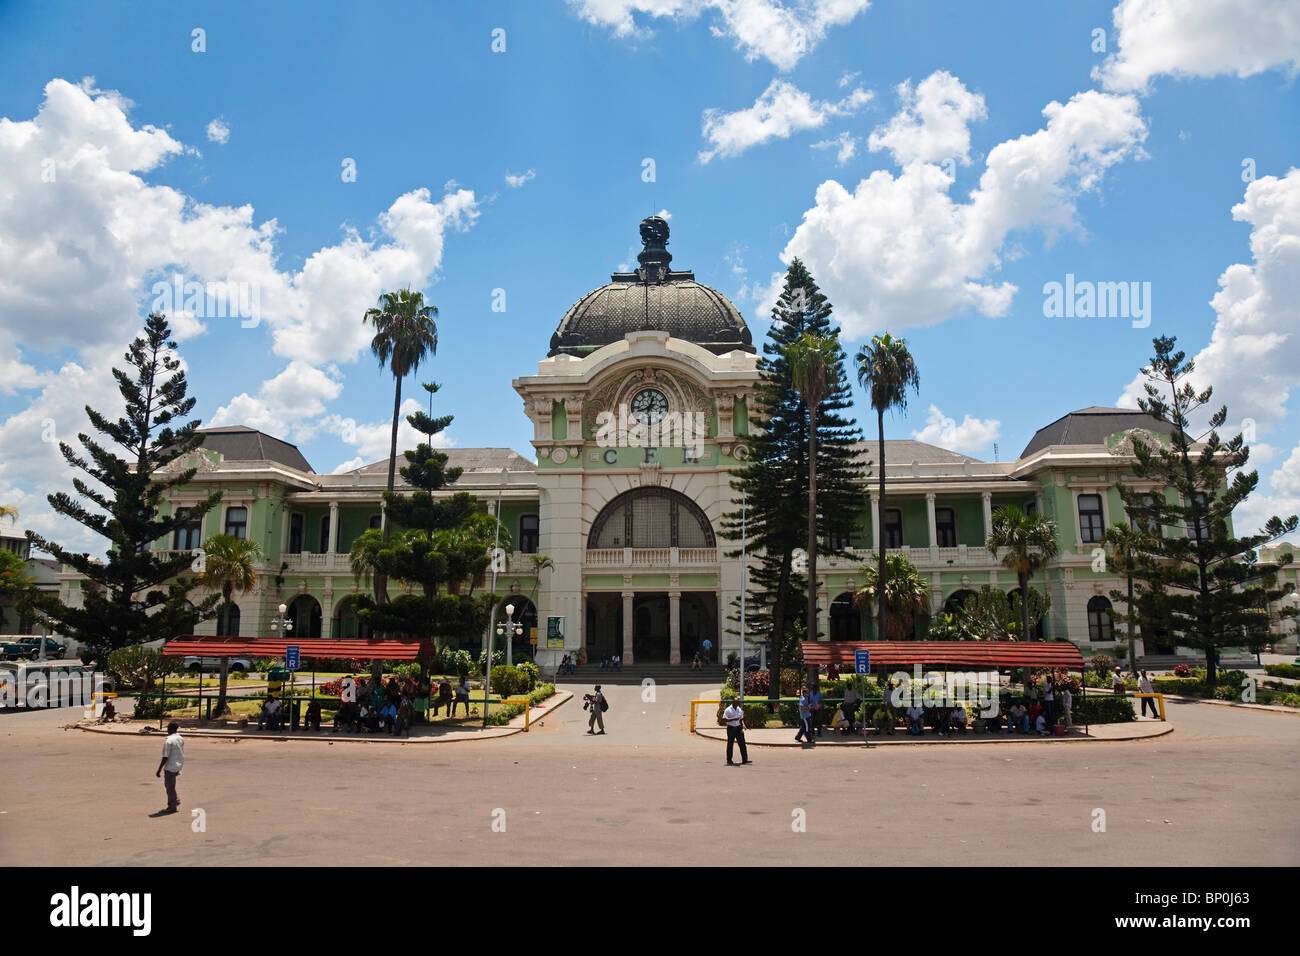 Mozambique, Maputo. The old railway station, built by Eiffel in the 1870s Stock Photo